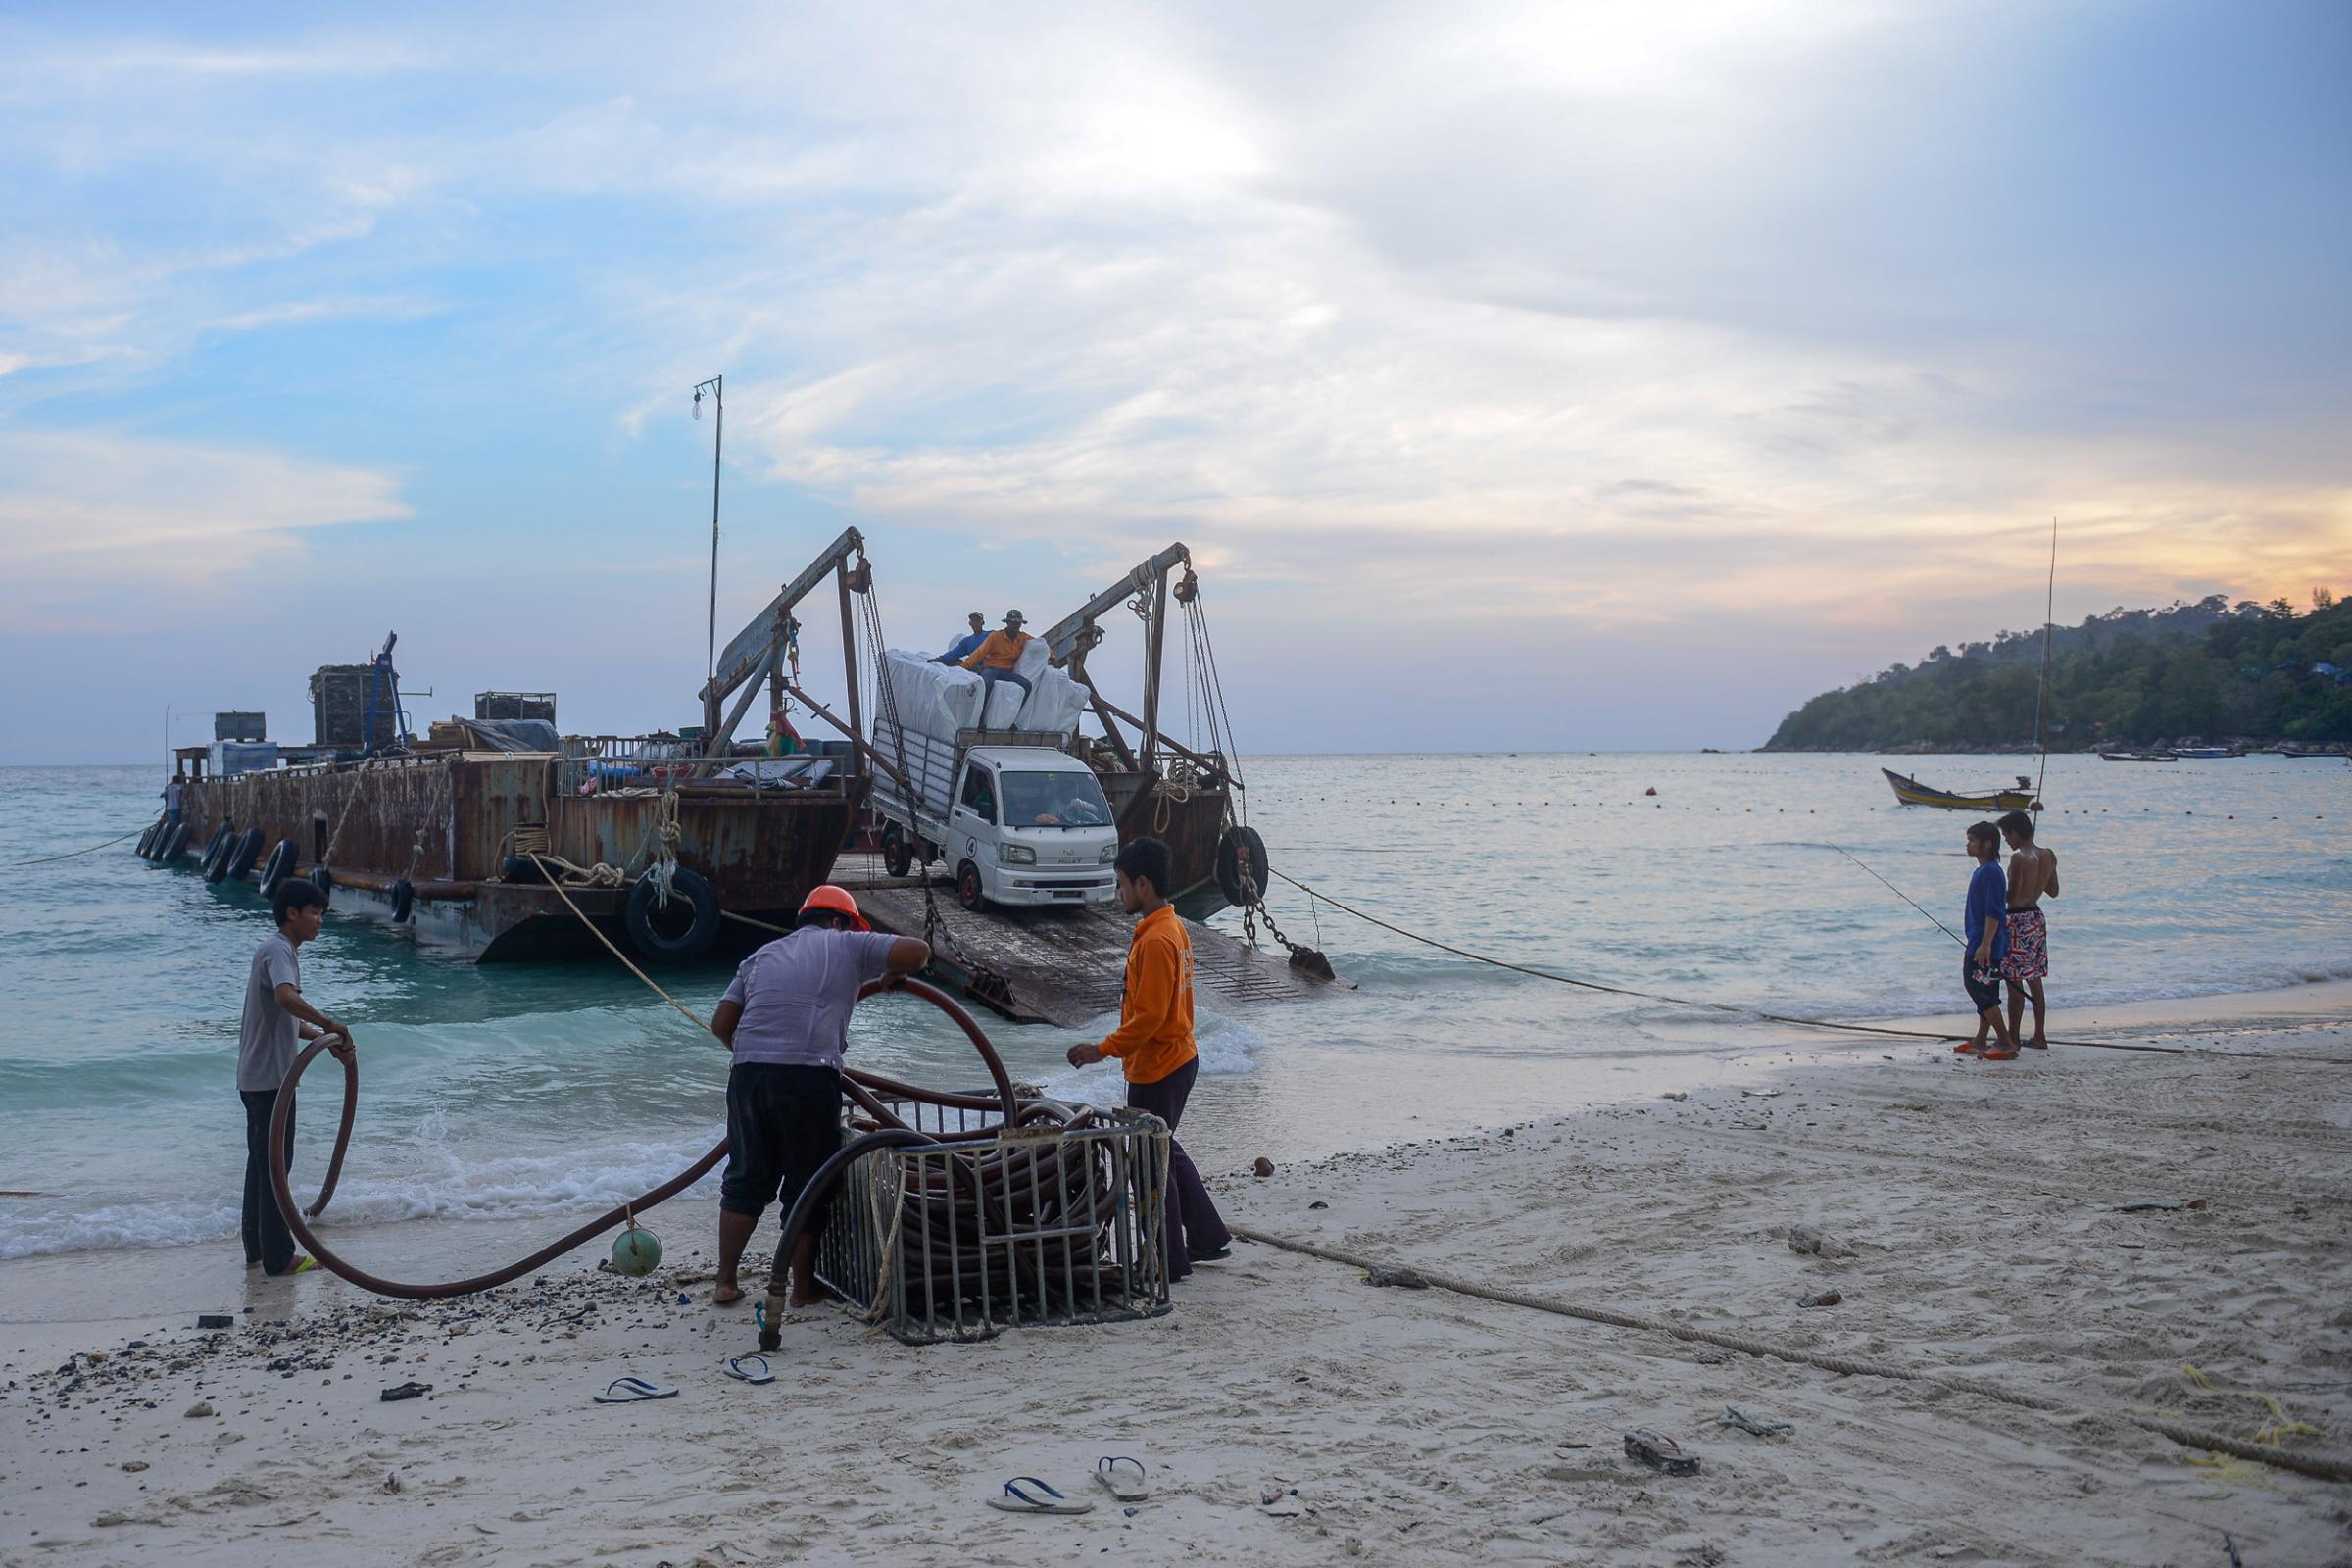 Lipe Island - A truck transport construction materials from the boat to...